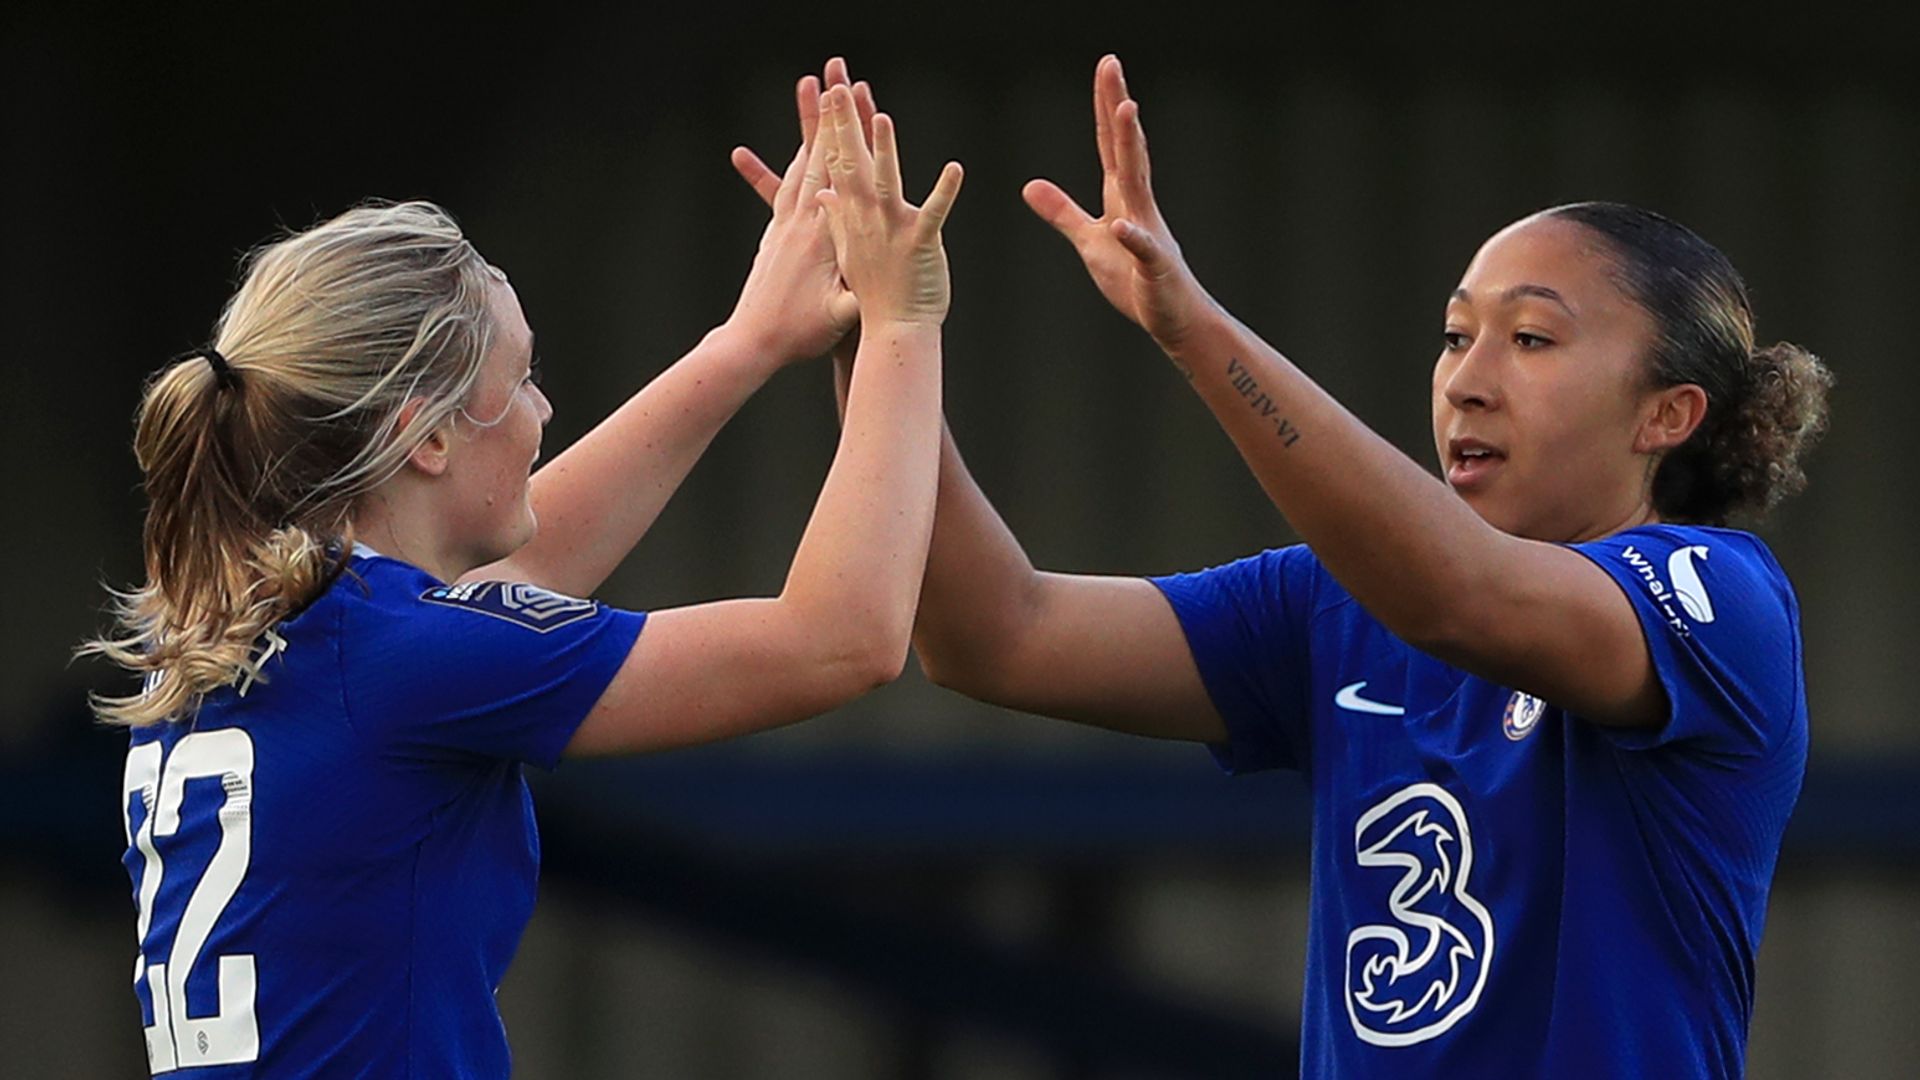 Chelsea 6-0 Leicester: Emma Hayes's side move one point behind Man Utd in the WSL title race

